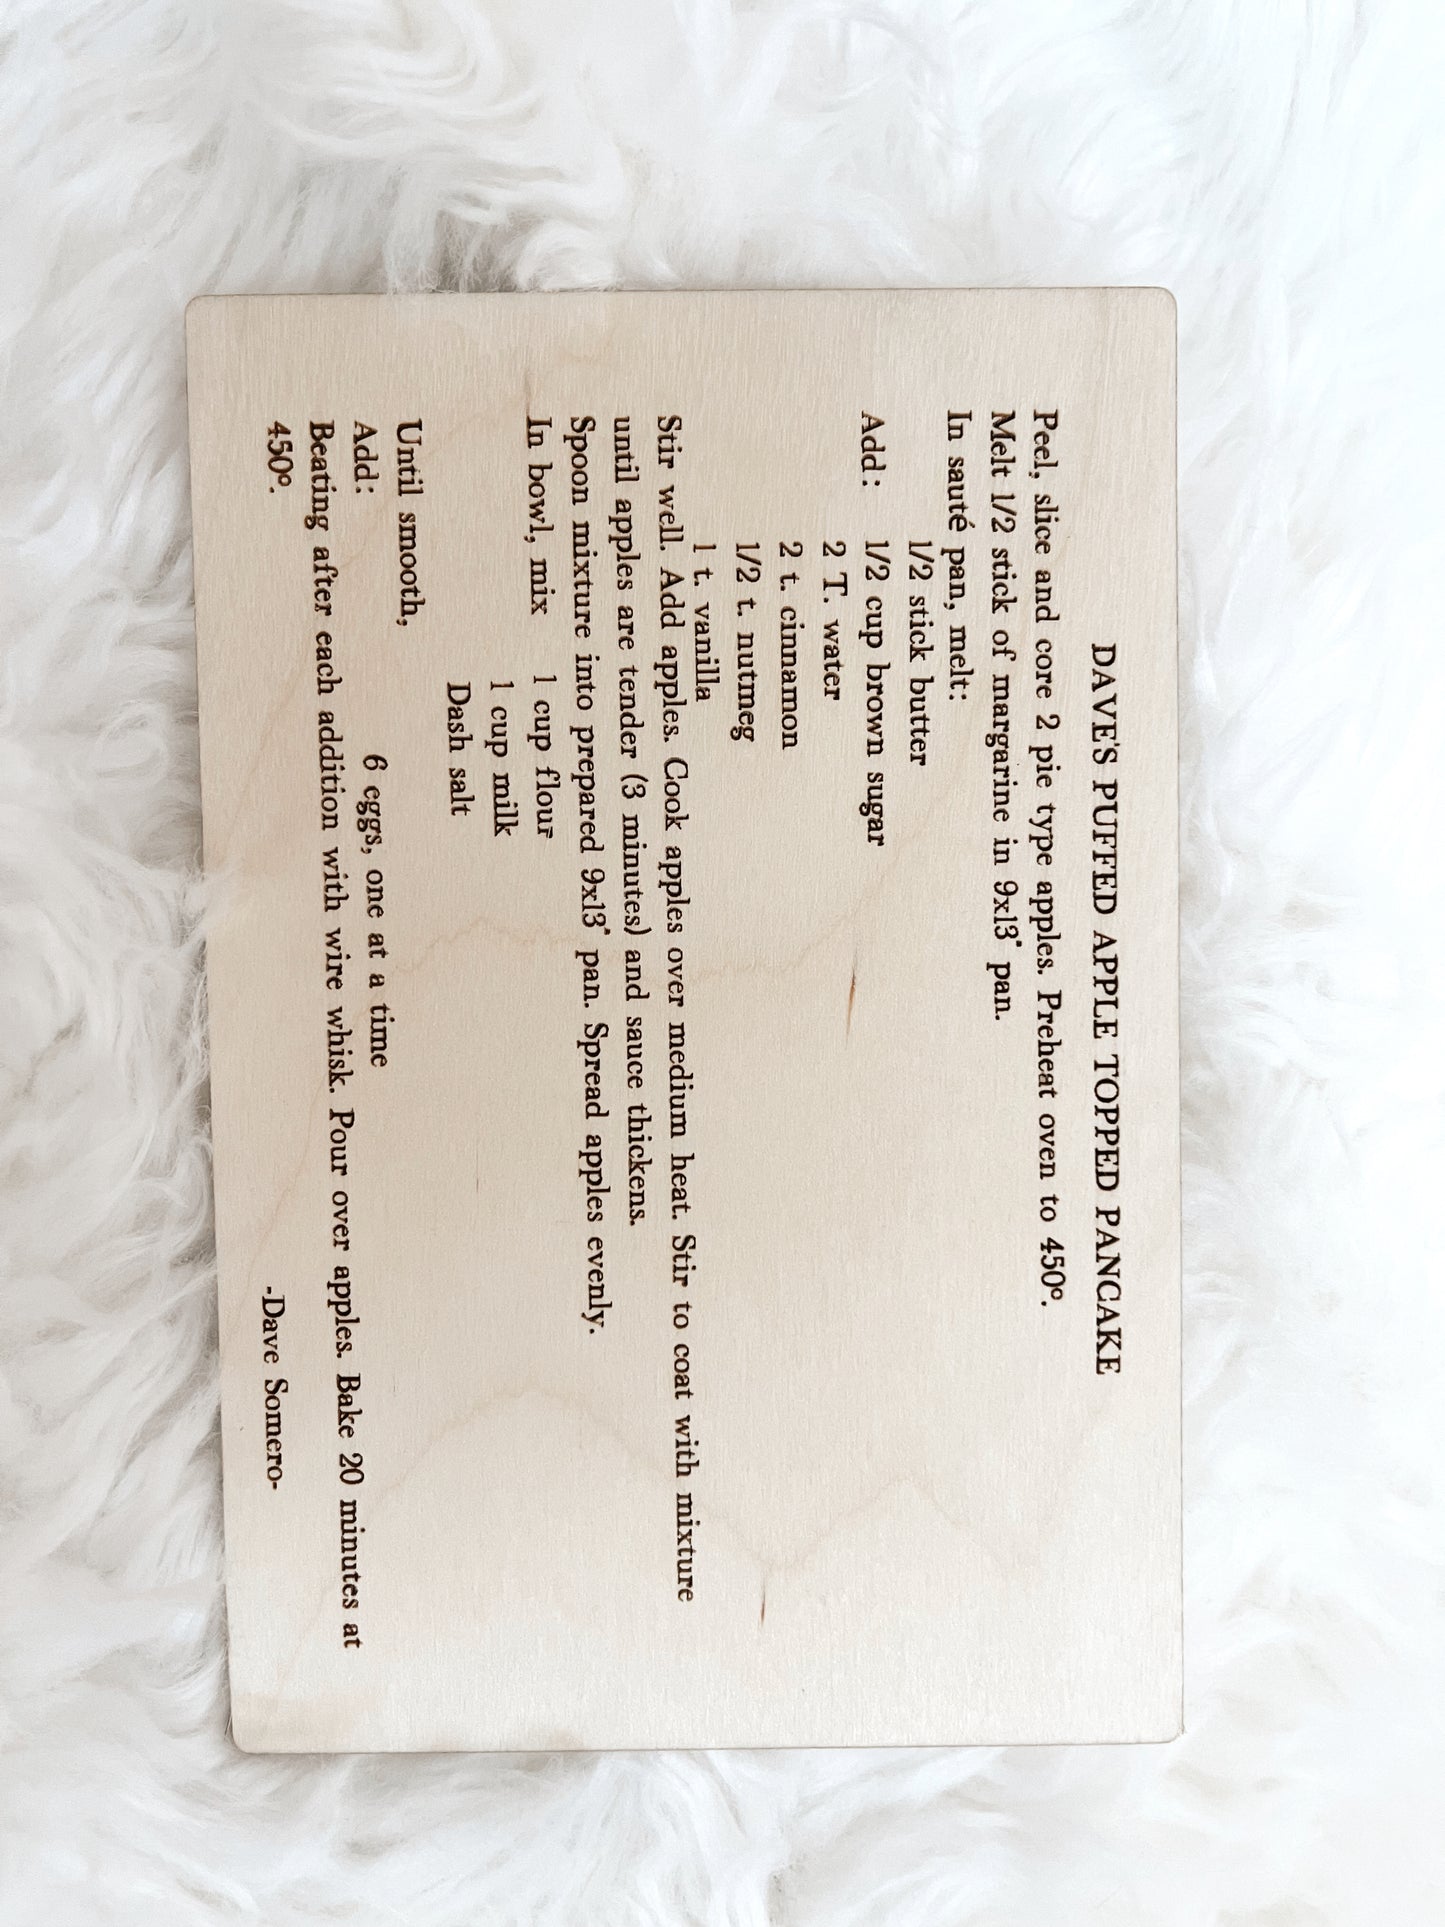 Personalized Wooden Recipe Card